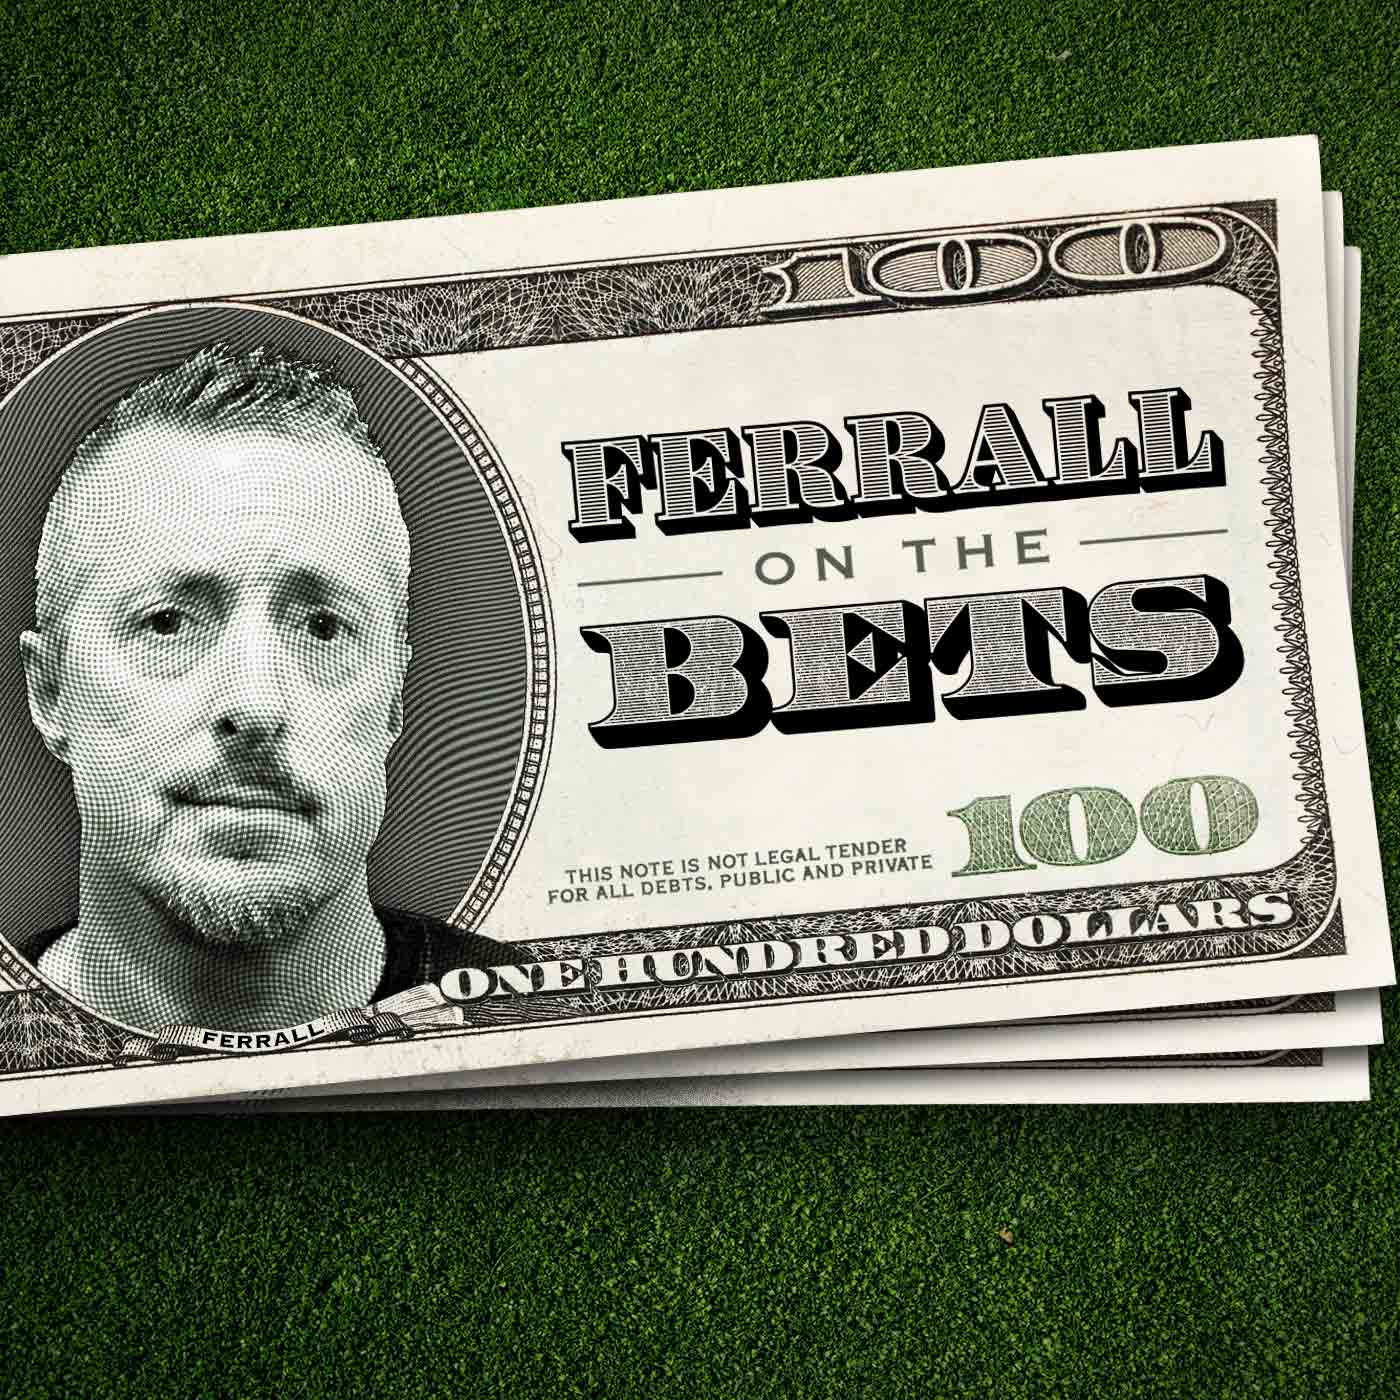 WESTWOOD ONE PODCAST NETWORK LAUNCHES “FERRALL ON THE BETS” WITH POPULAR CBS SPORTS RADIO STAR SCOTT FERRALL